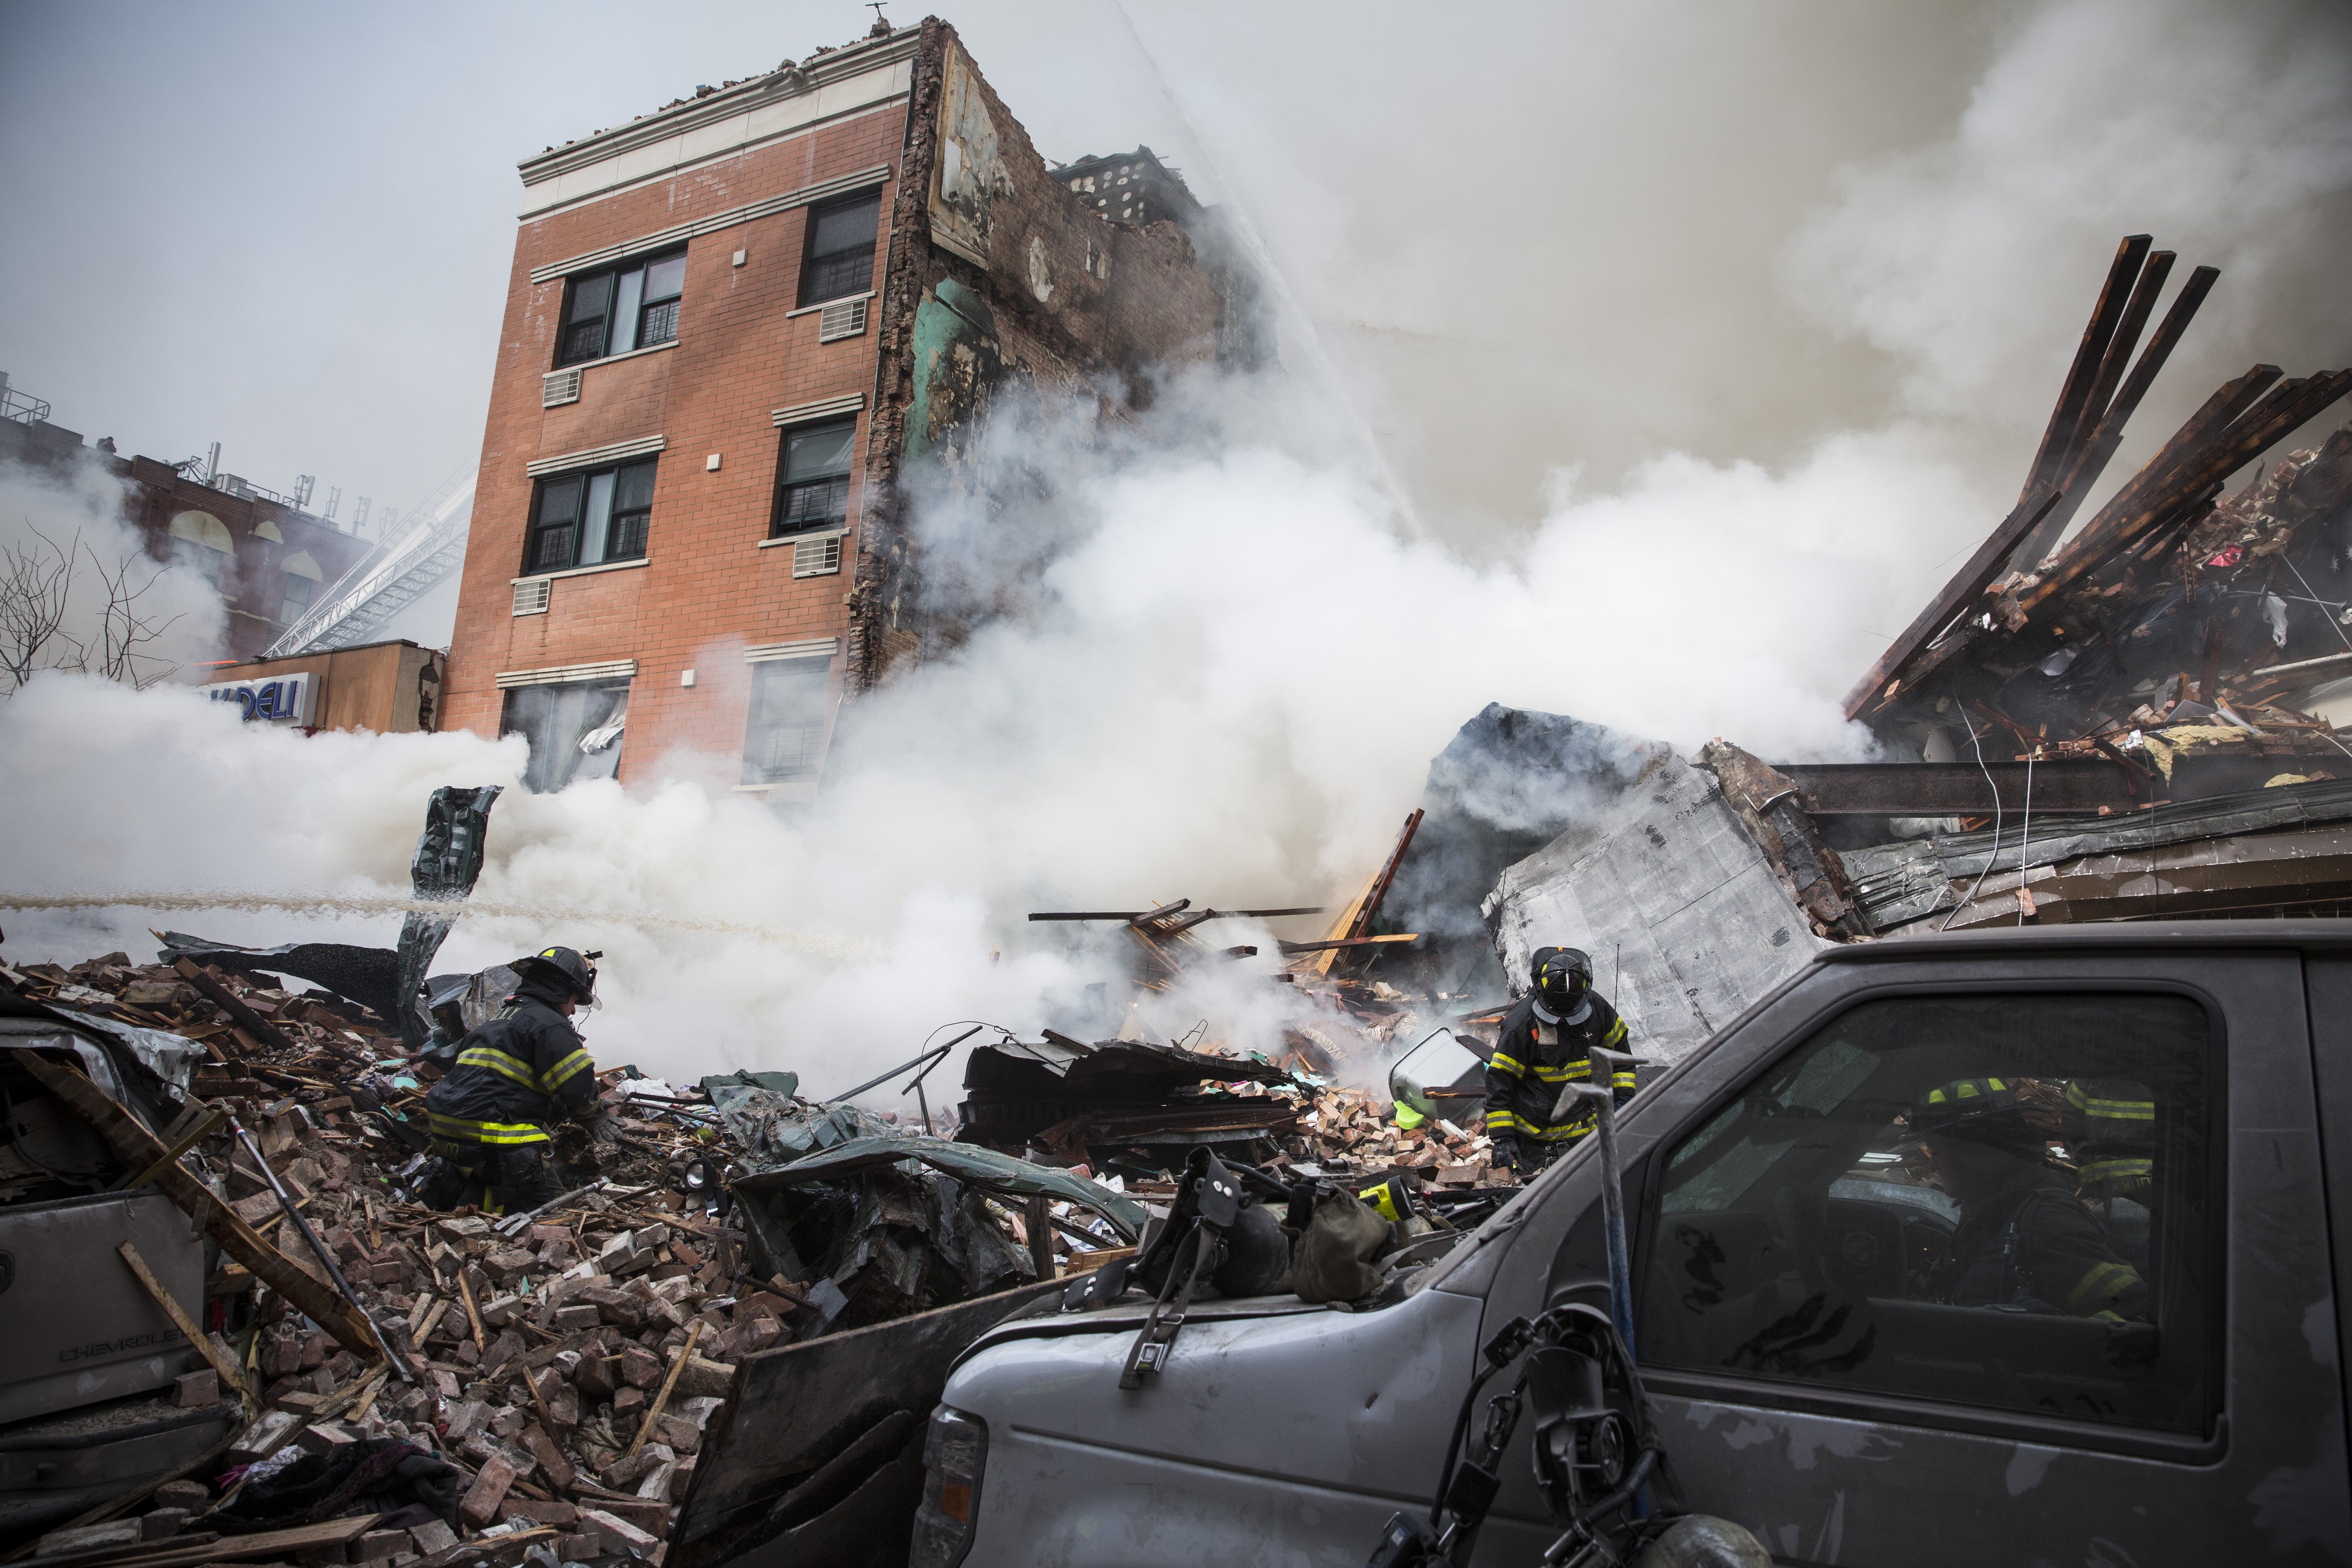 Smoke pours from the debris as the New York City Fire Department responds to a fire and building collapse at 1646 Park Avenue in the Harlem neighborhood of Manhattan on March 12, 2014